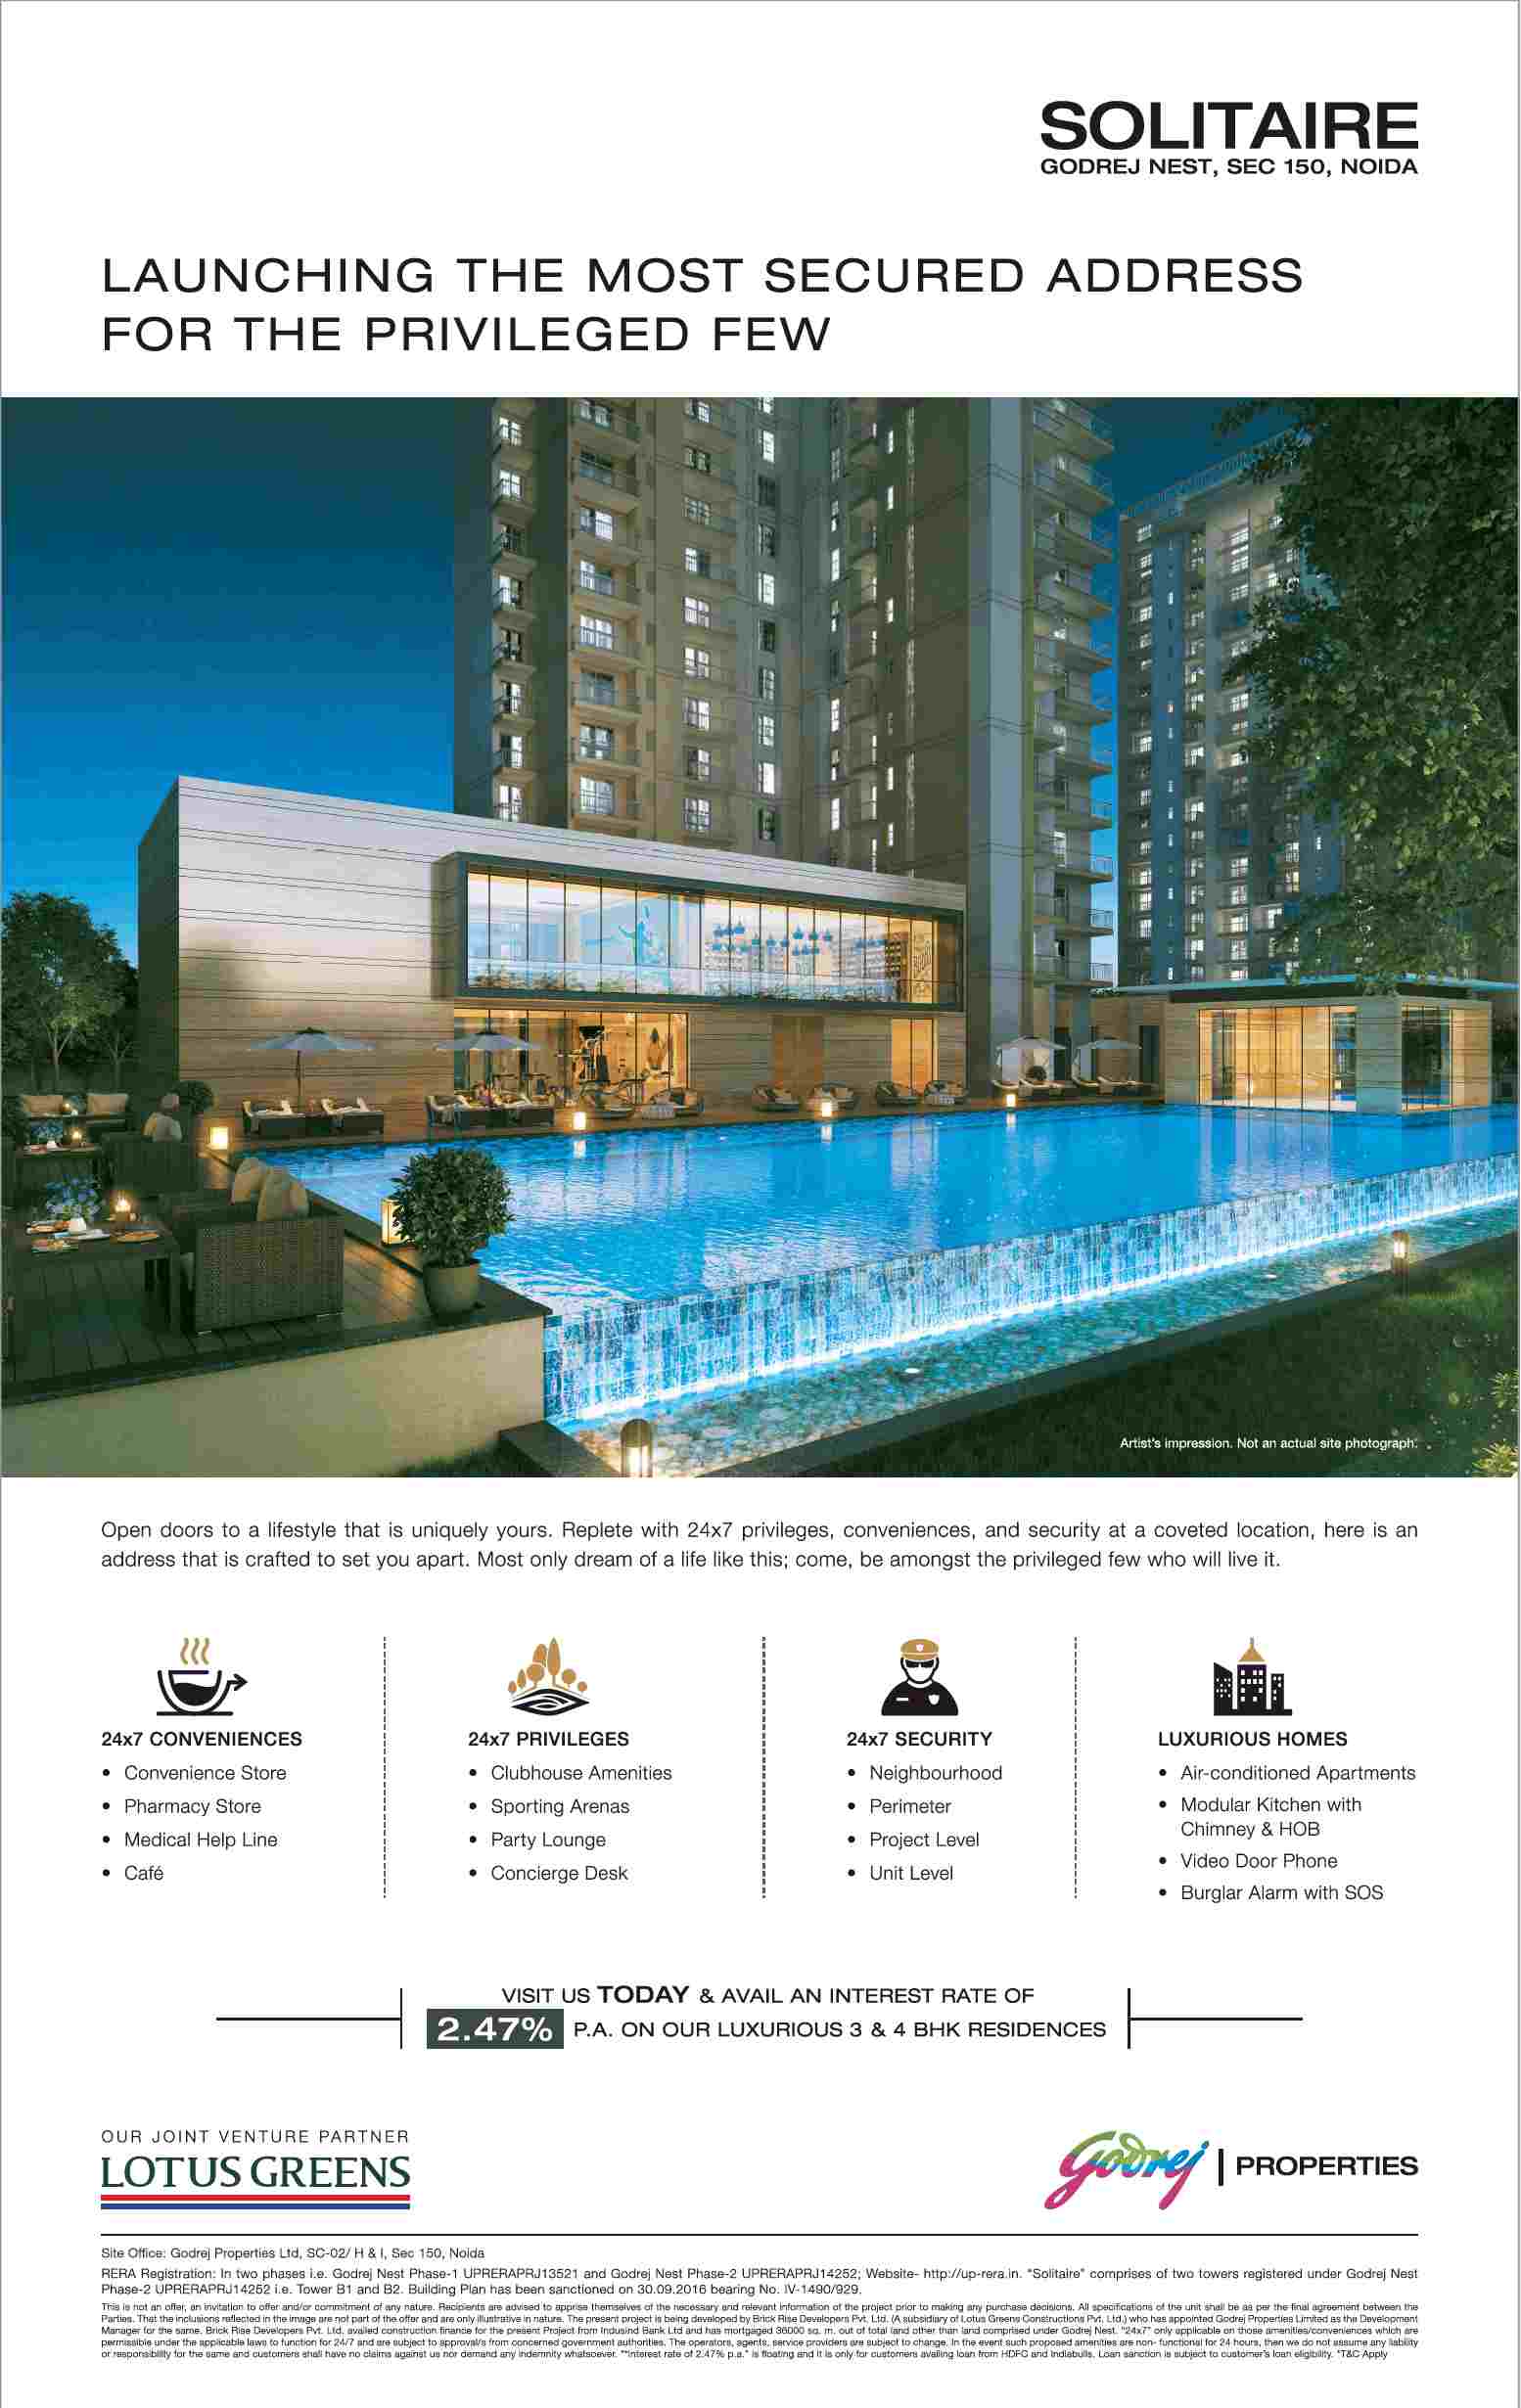 Launching Solitaire, the most secured address at Godrej Nest in Noida